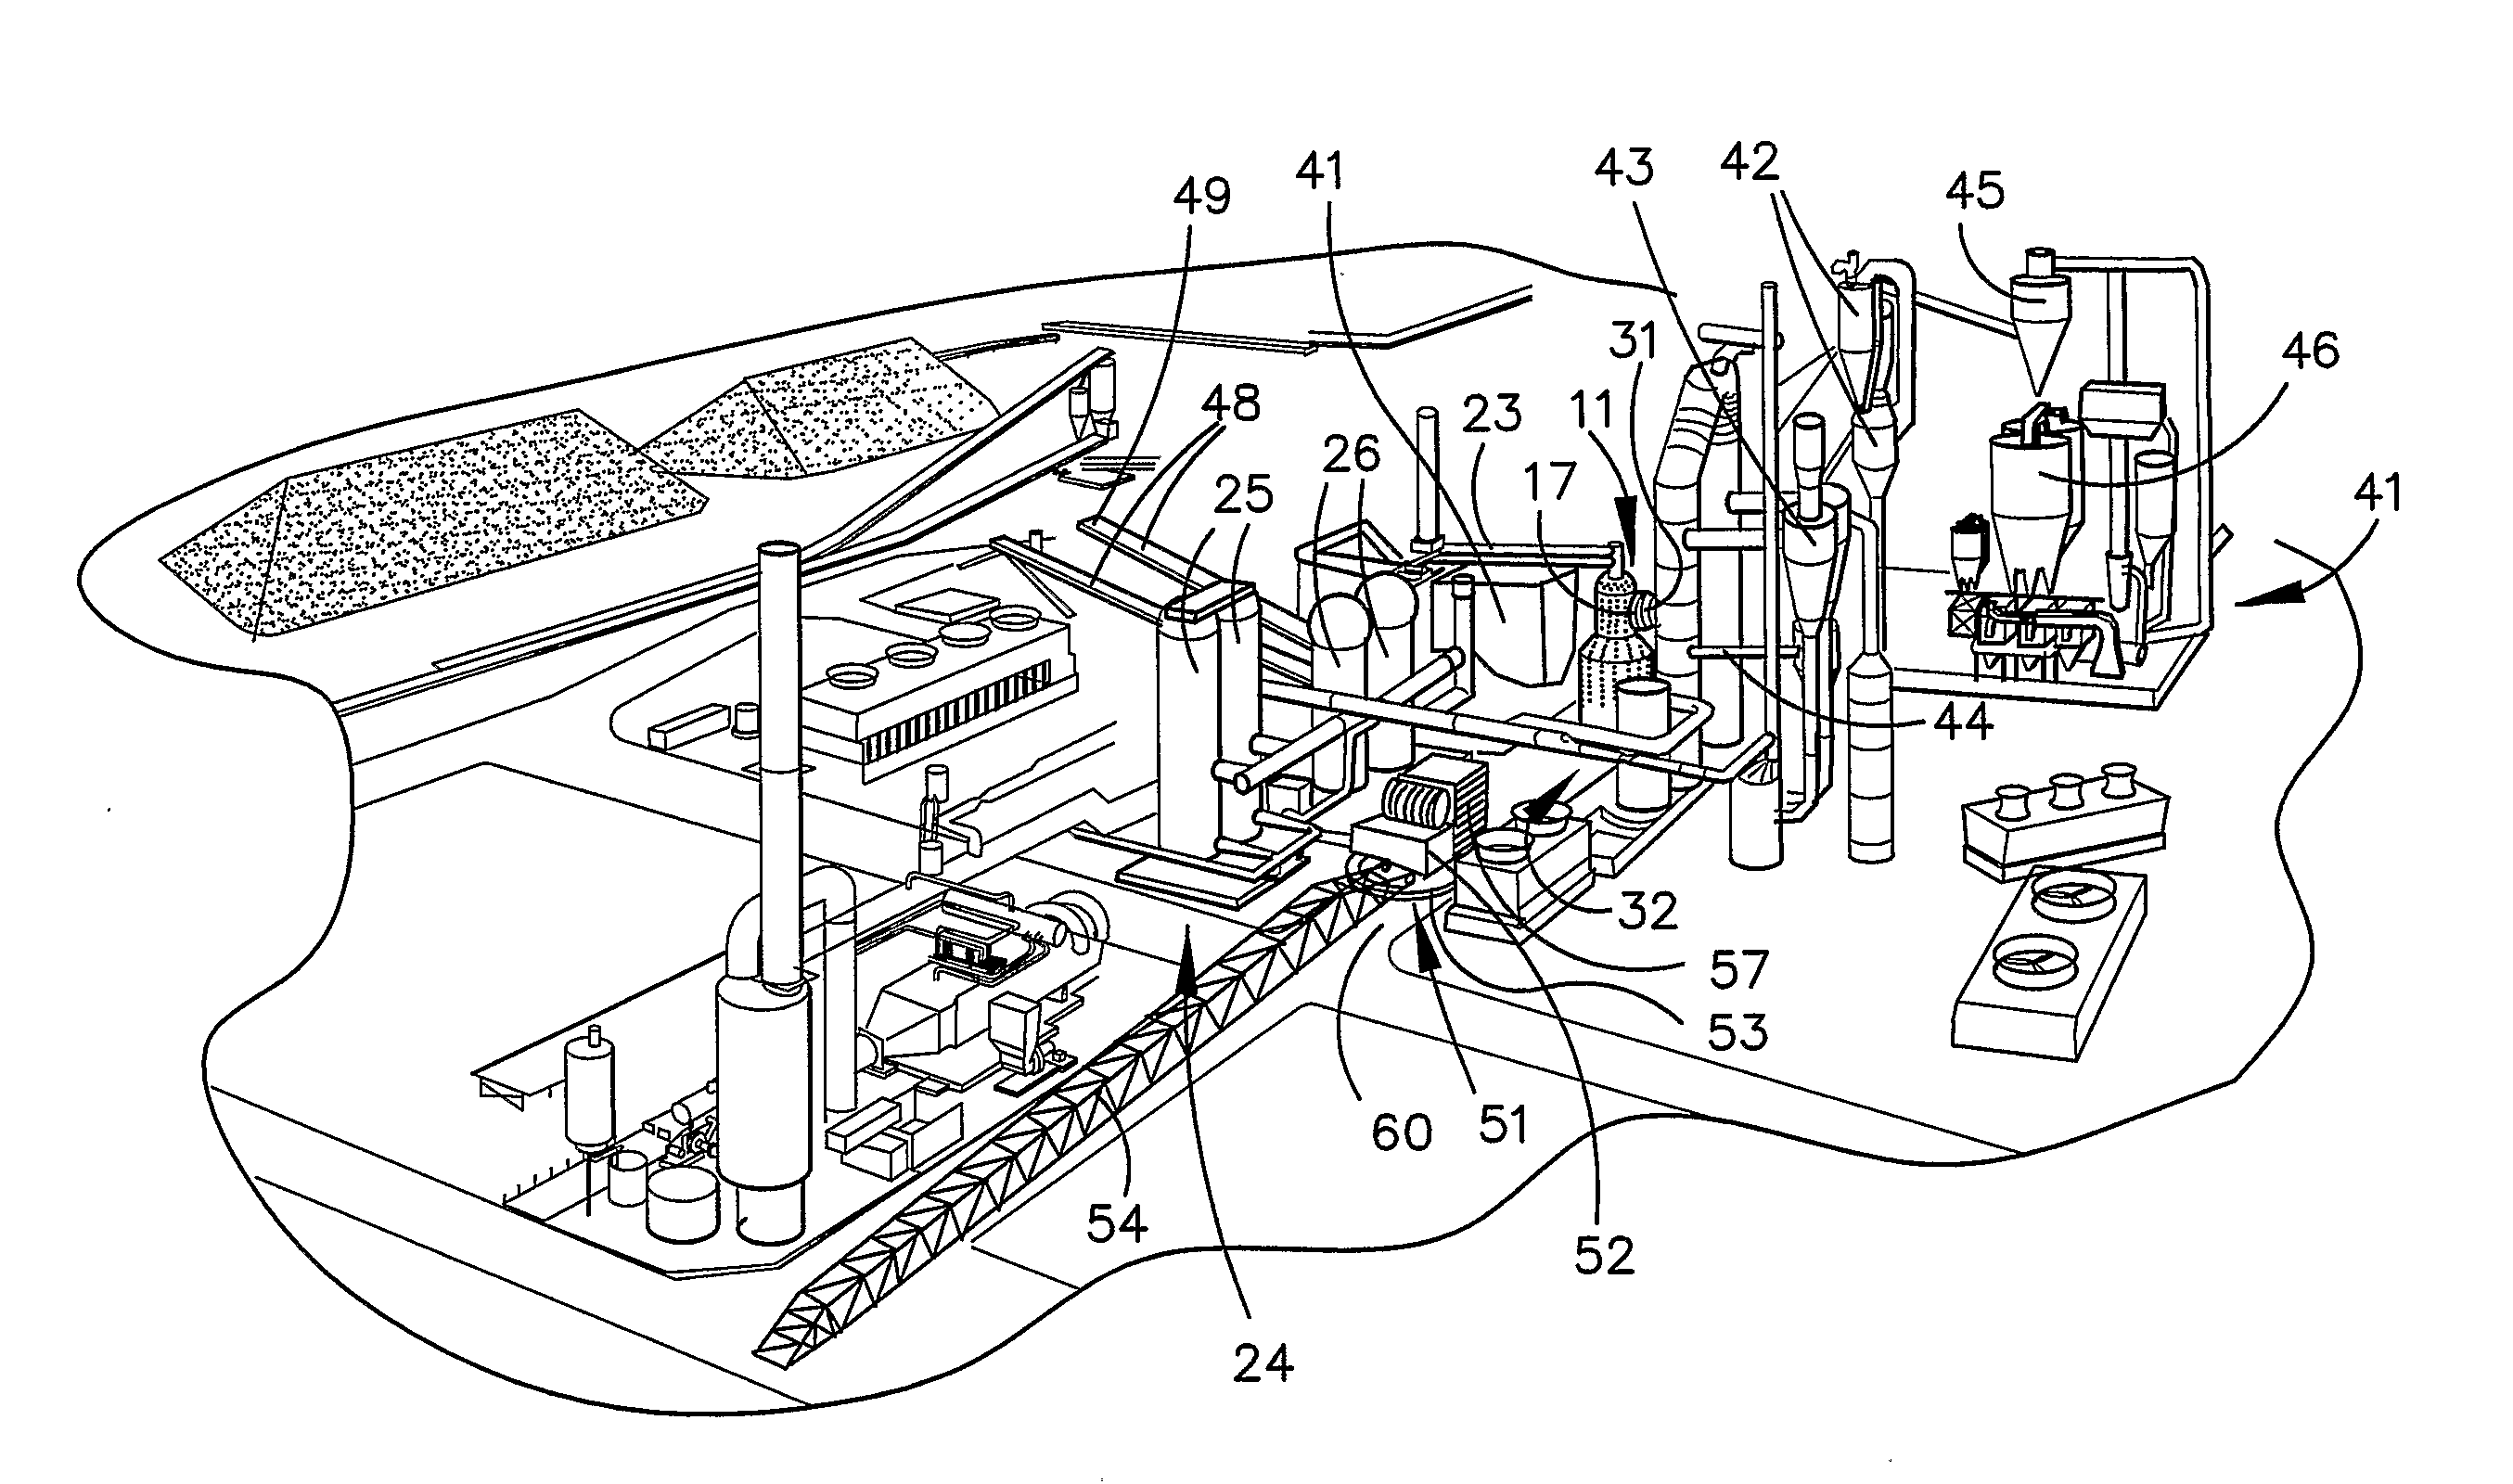 Method of Building a Direct Smelting Plant